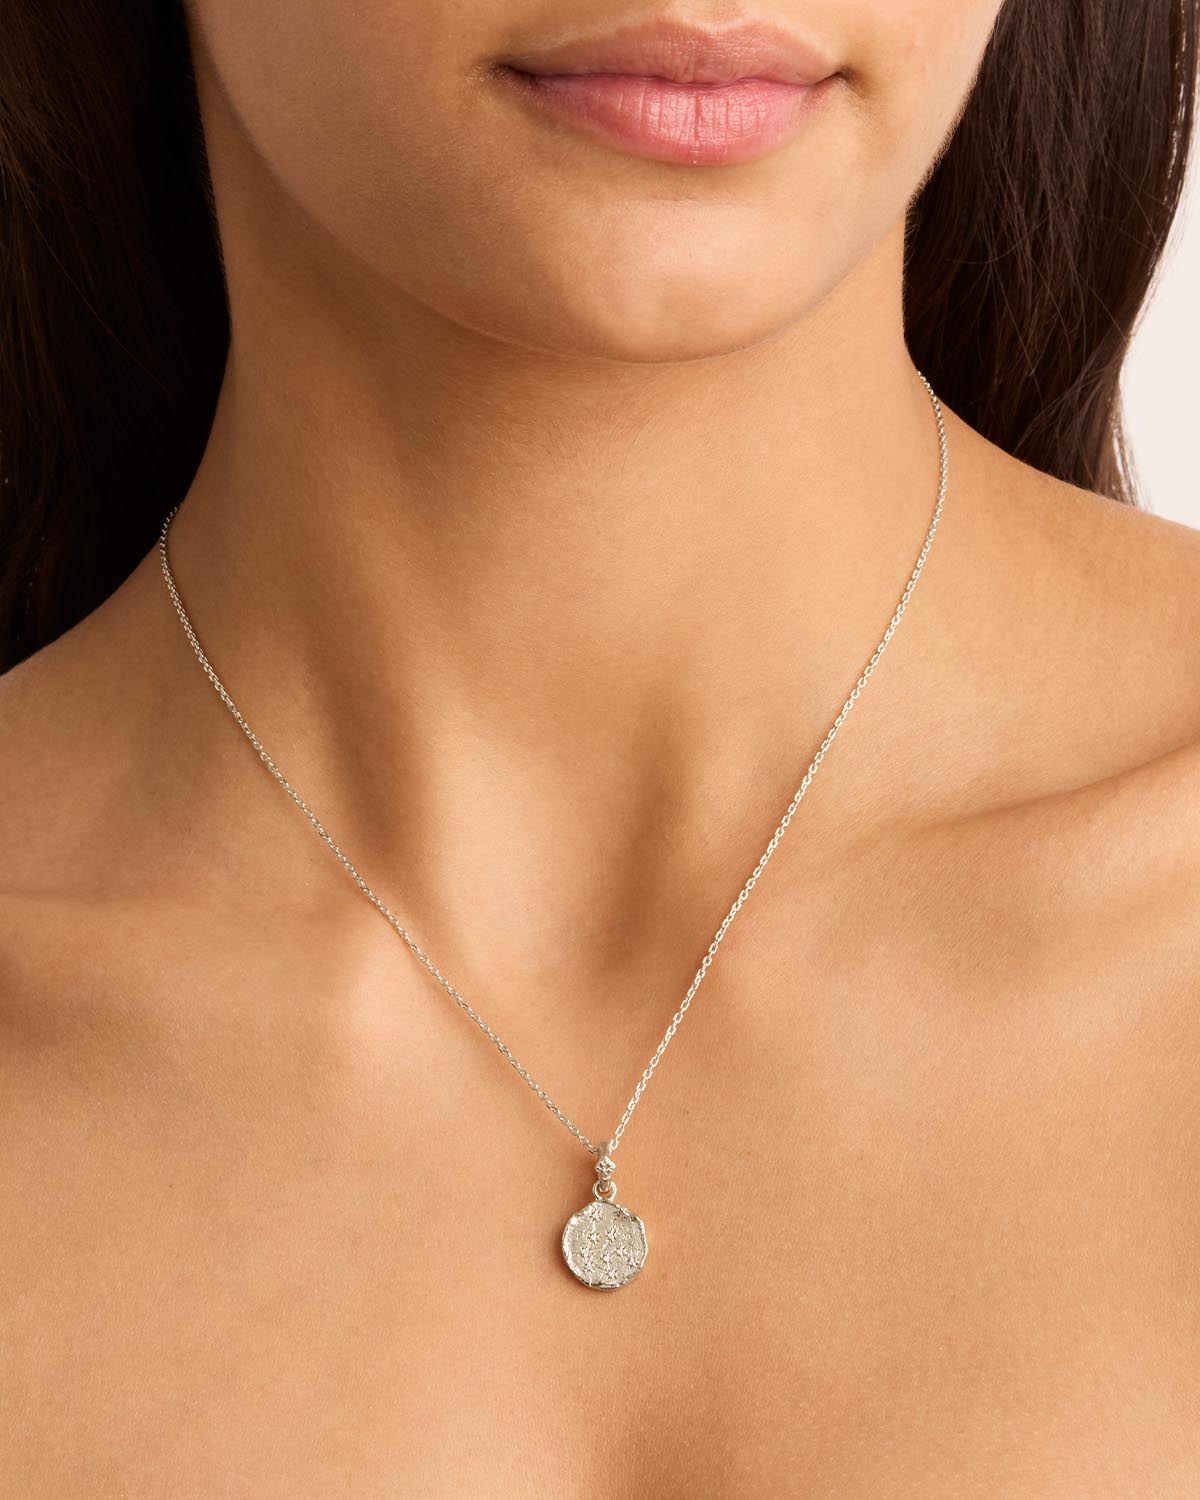 Reversible Aquarius Zodiac Sign Charm Coin Pendant Necklace in Sterlin |  Takar Jewelry